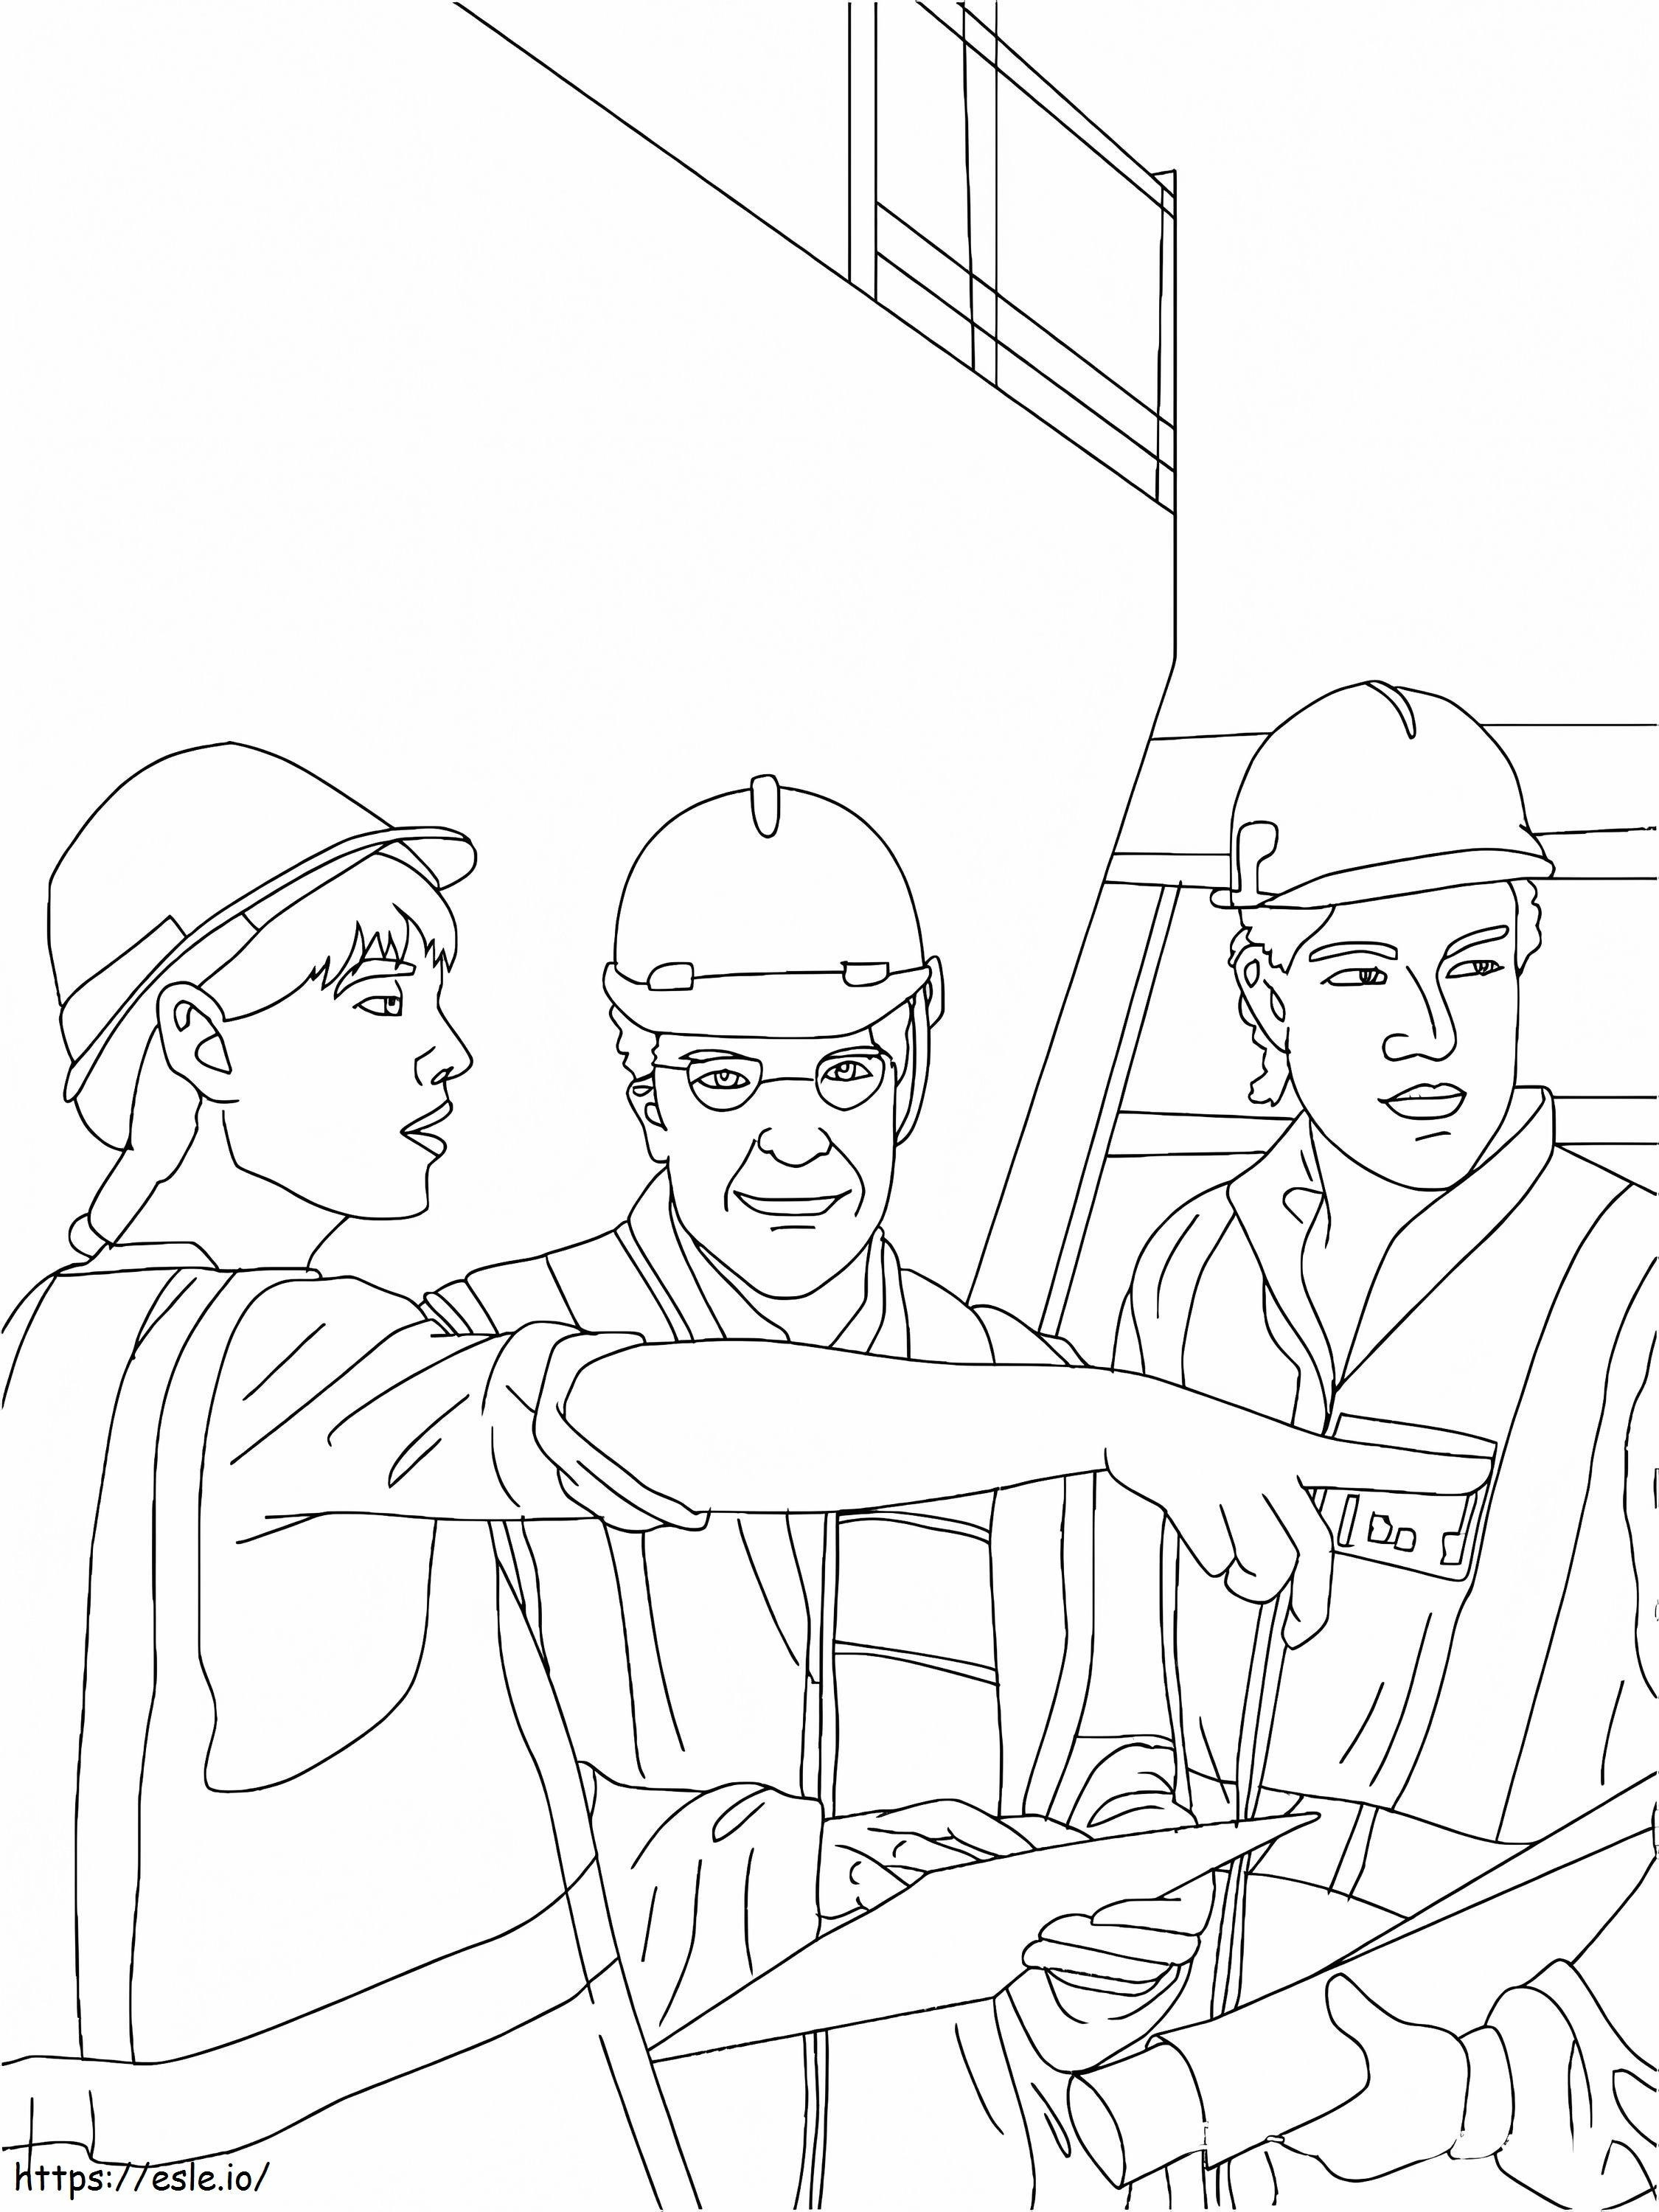 Engineer 7 coloring page